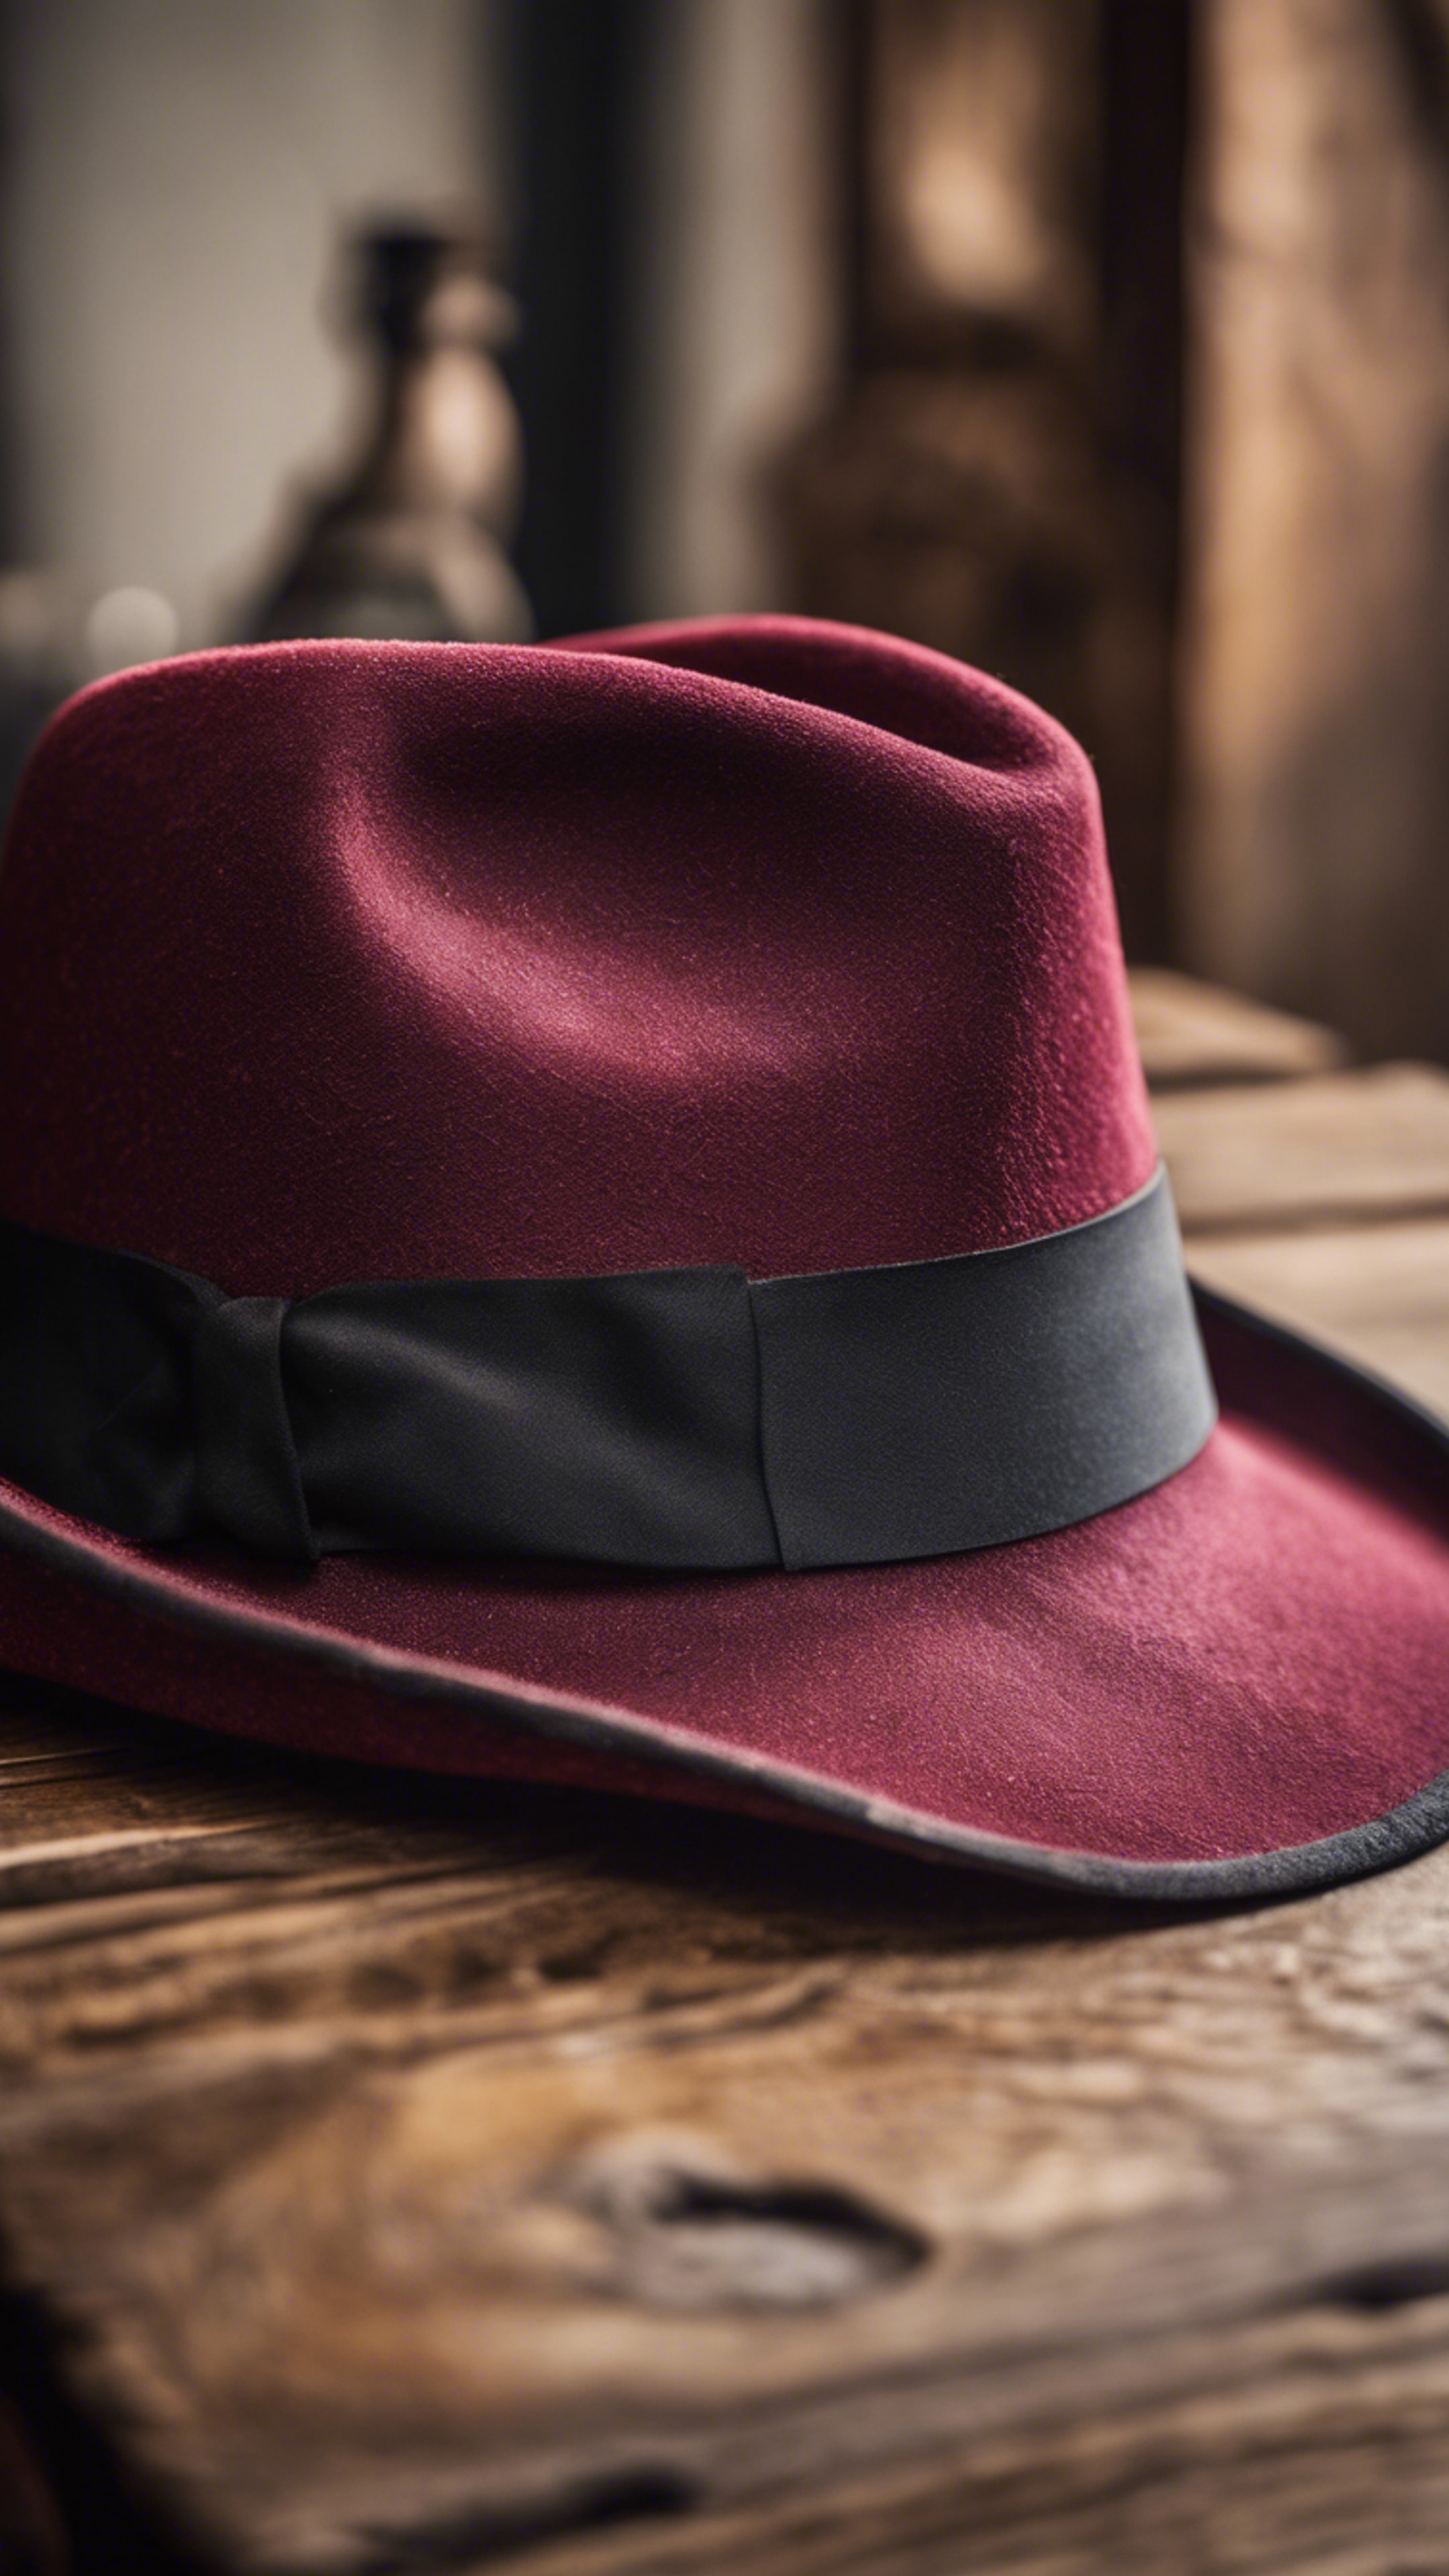 A cool maroon fedora hat positioned on an antique wooden table. کاغذ دیواری[05b3f475f93c4ade83cc]